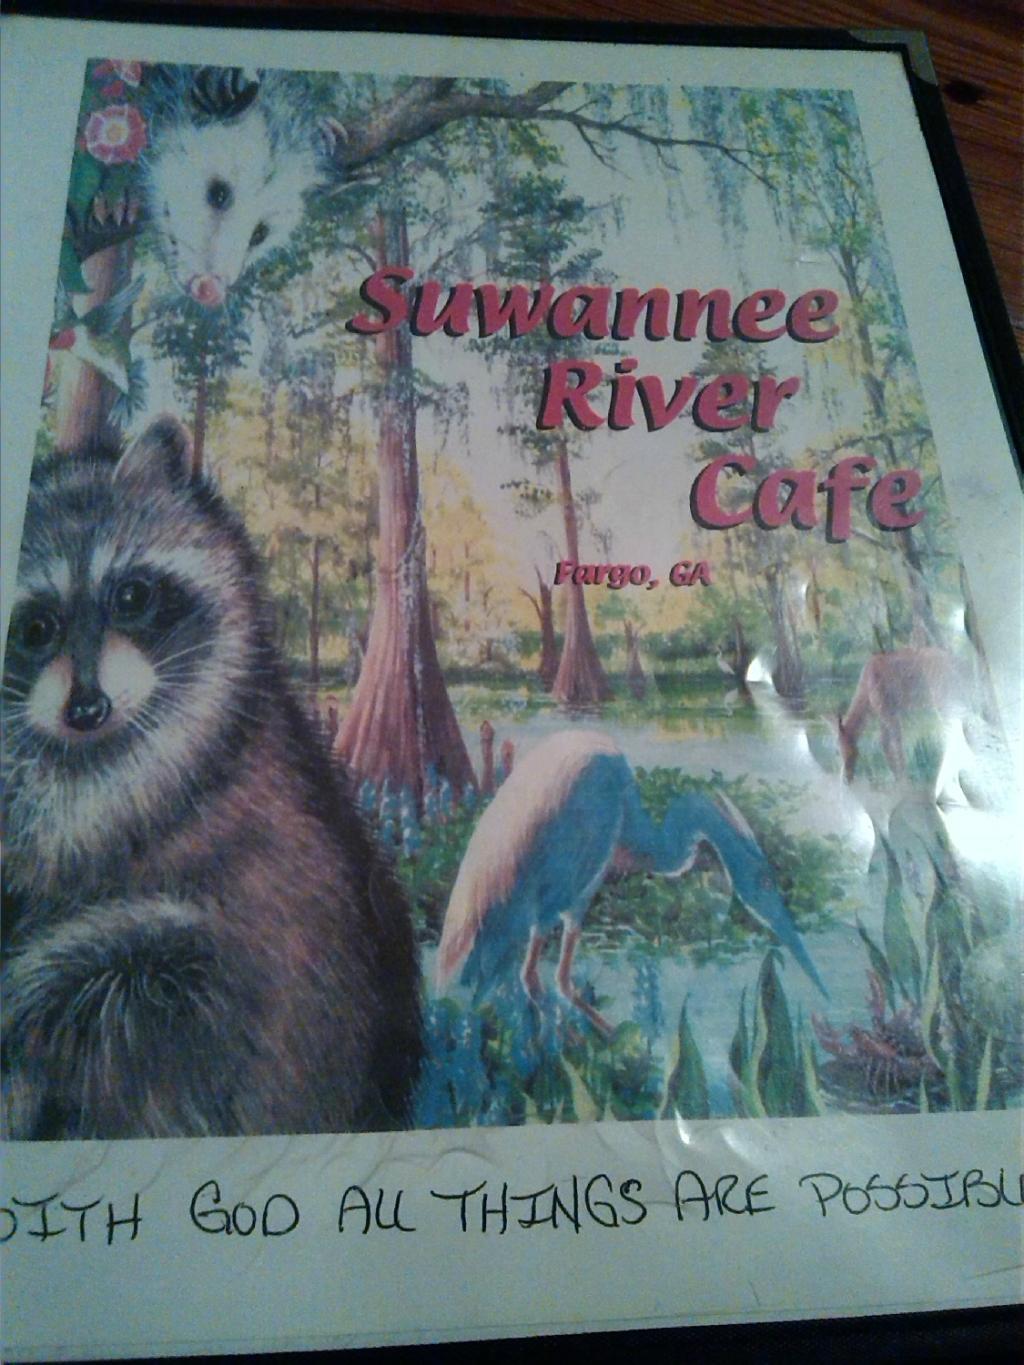 Swannee River Cafe